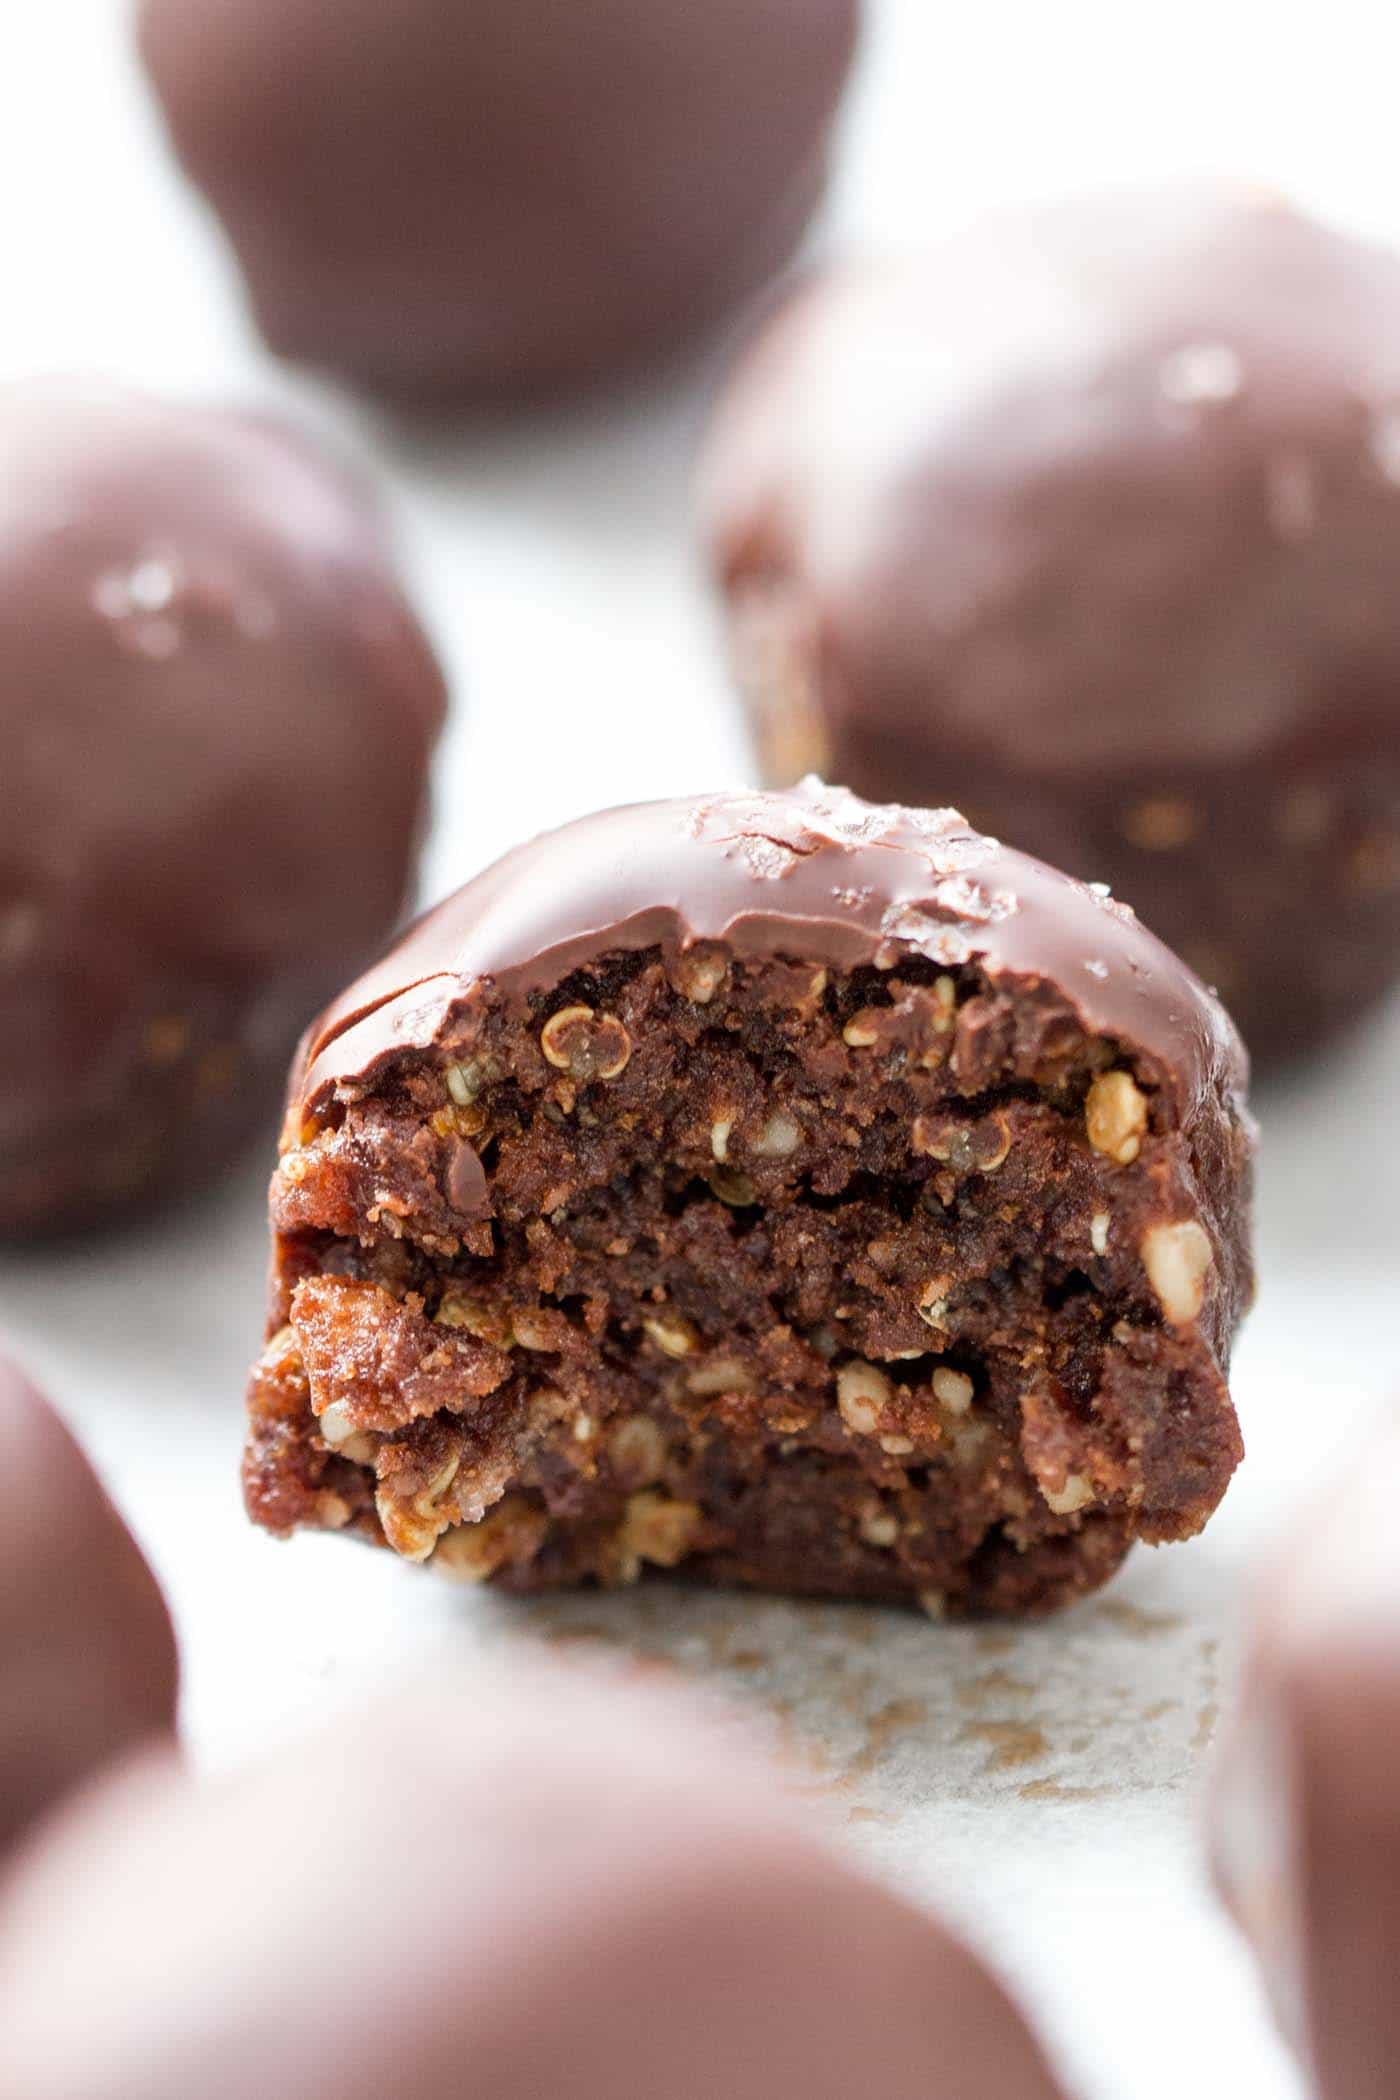 These energy balls taste like candy but they're actually good for you! They've got quinoa, raw cacao powder, nuts and dried fruit as the sweetener [also vegan + gf]